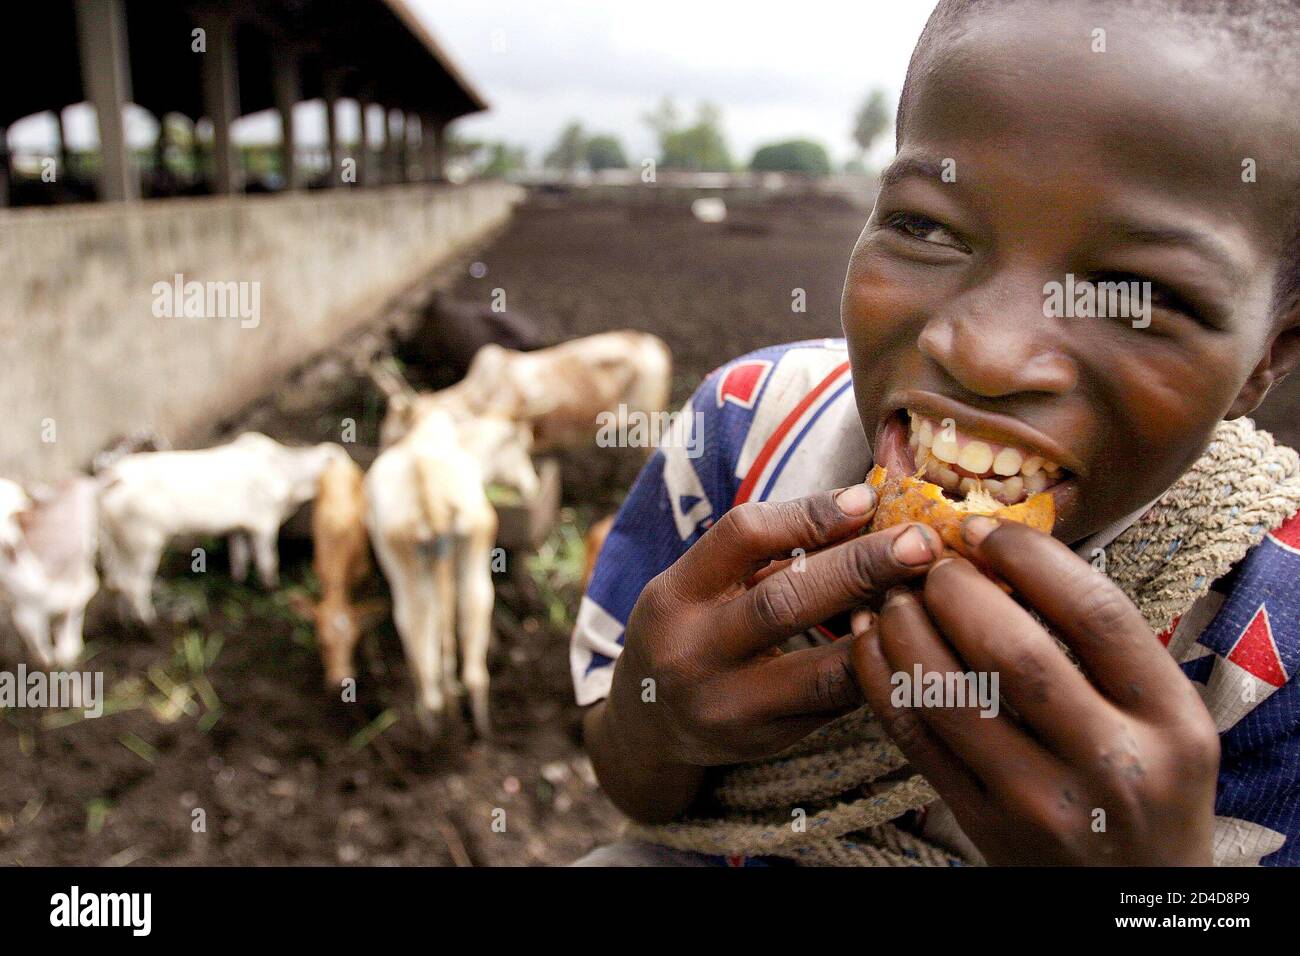 A boy eats fruit at a cattle slaughterhouse in the main city of Abidjan in Ivory Coast July 5, 2005. African Union (AU) heads of state urged a summit of rich nations to act rapidly to end poverty on the continent, saying they should implement all the proposals of a British-backed report on aid, trade and debt. 'The Assembly (of AU leaders) fully supports the recommendations contained in the Commission for Africa report,' read a resolution issued to reporters at the pan-continental organisation's half-yearly gathering of leaders. The report, commissioned by British Prime Minister Tony Blair for Stock Photo